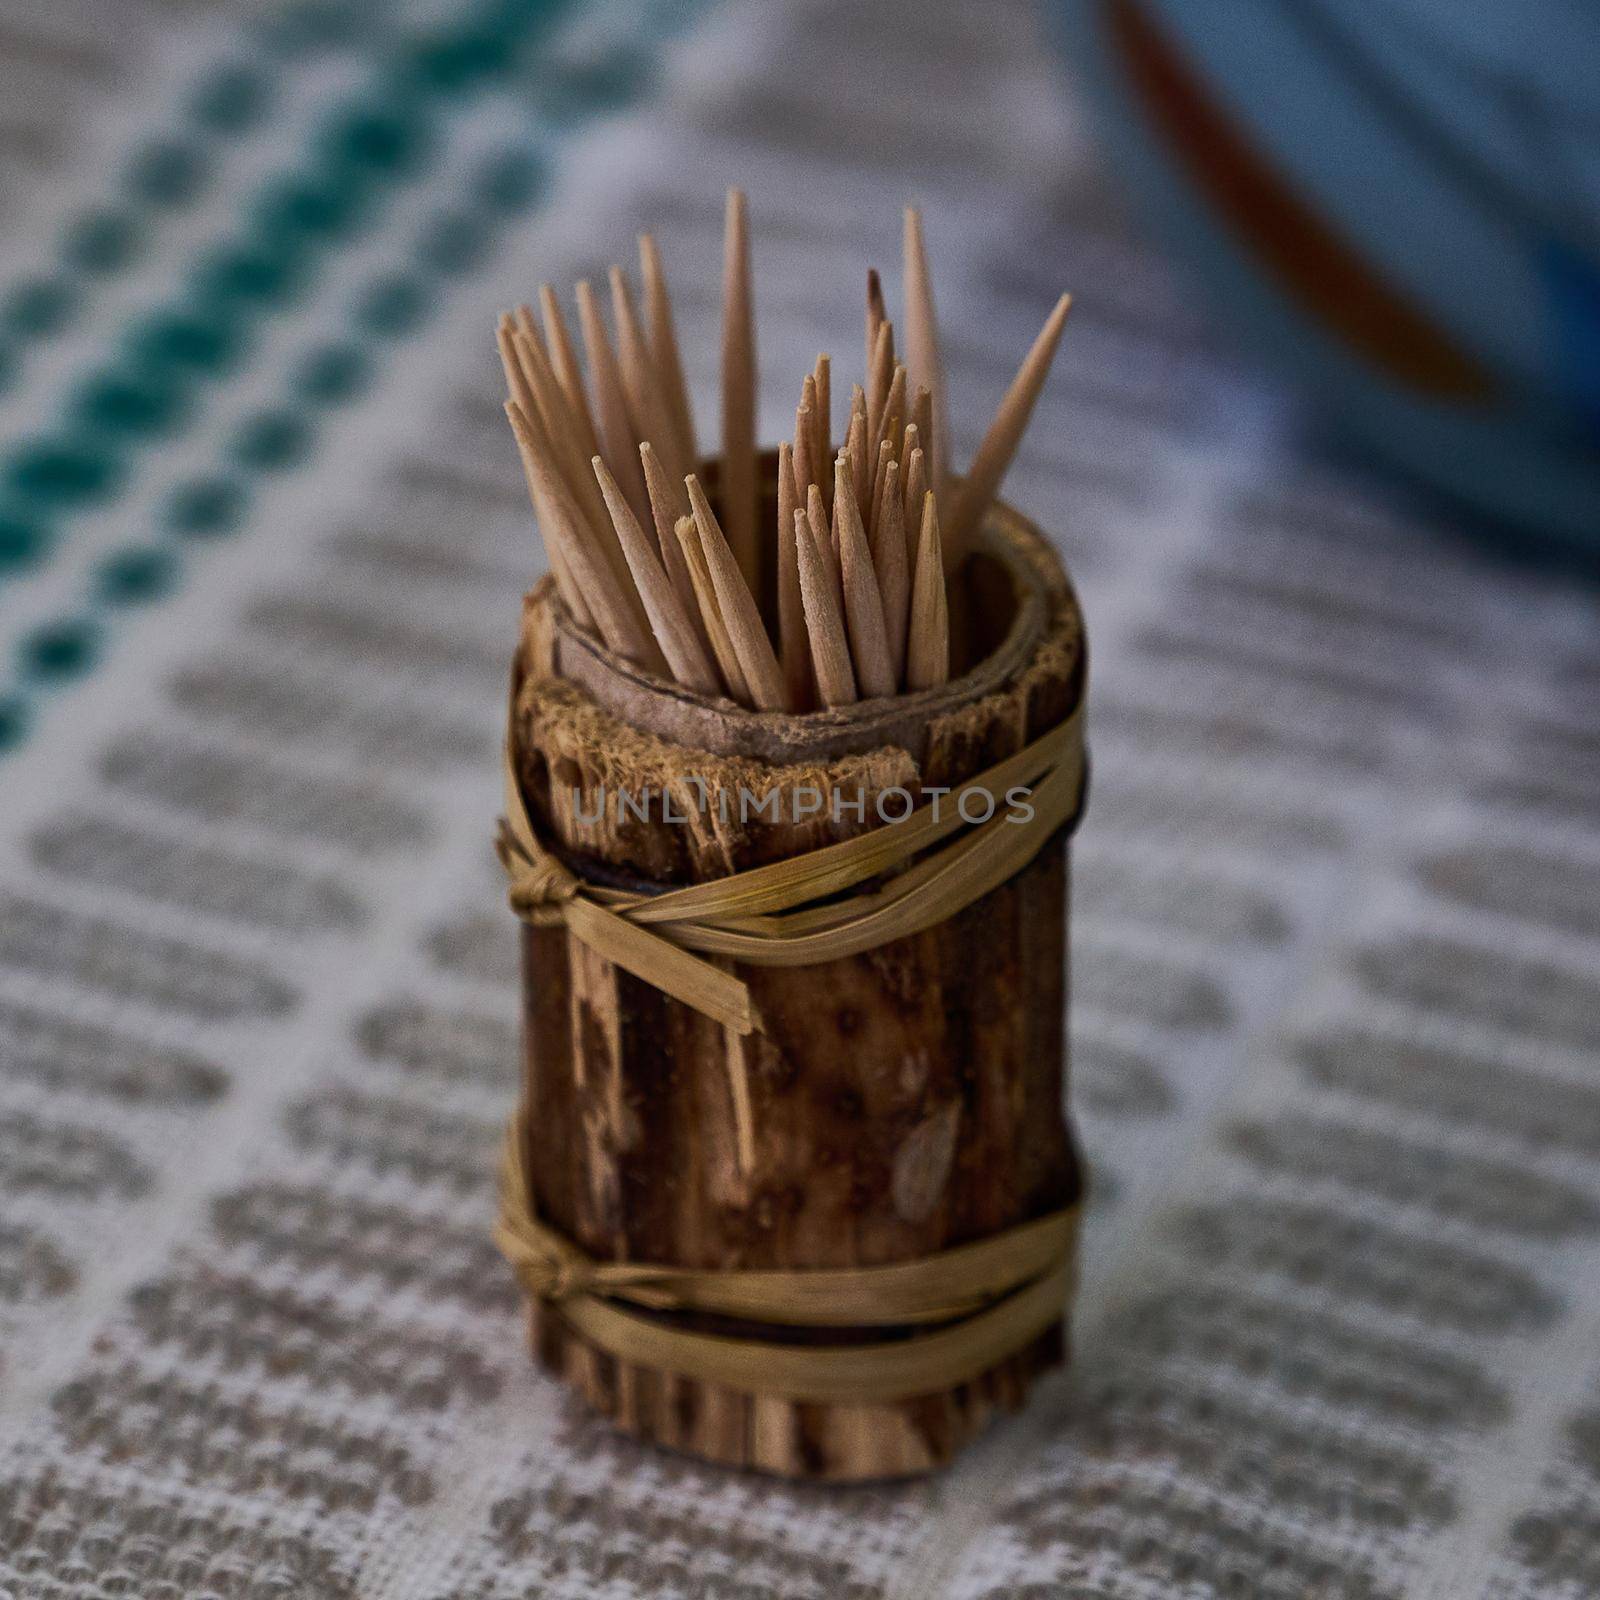 a jar with wooden toothpicks is on the table close-up photo